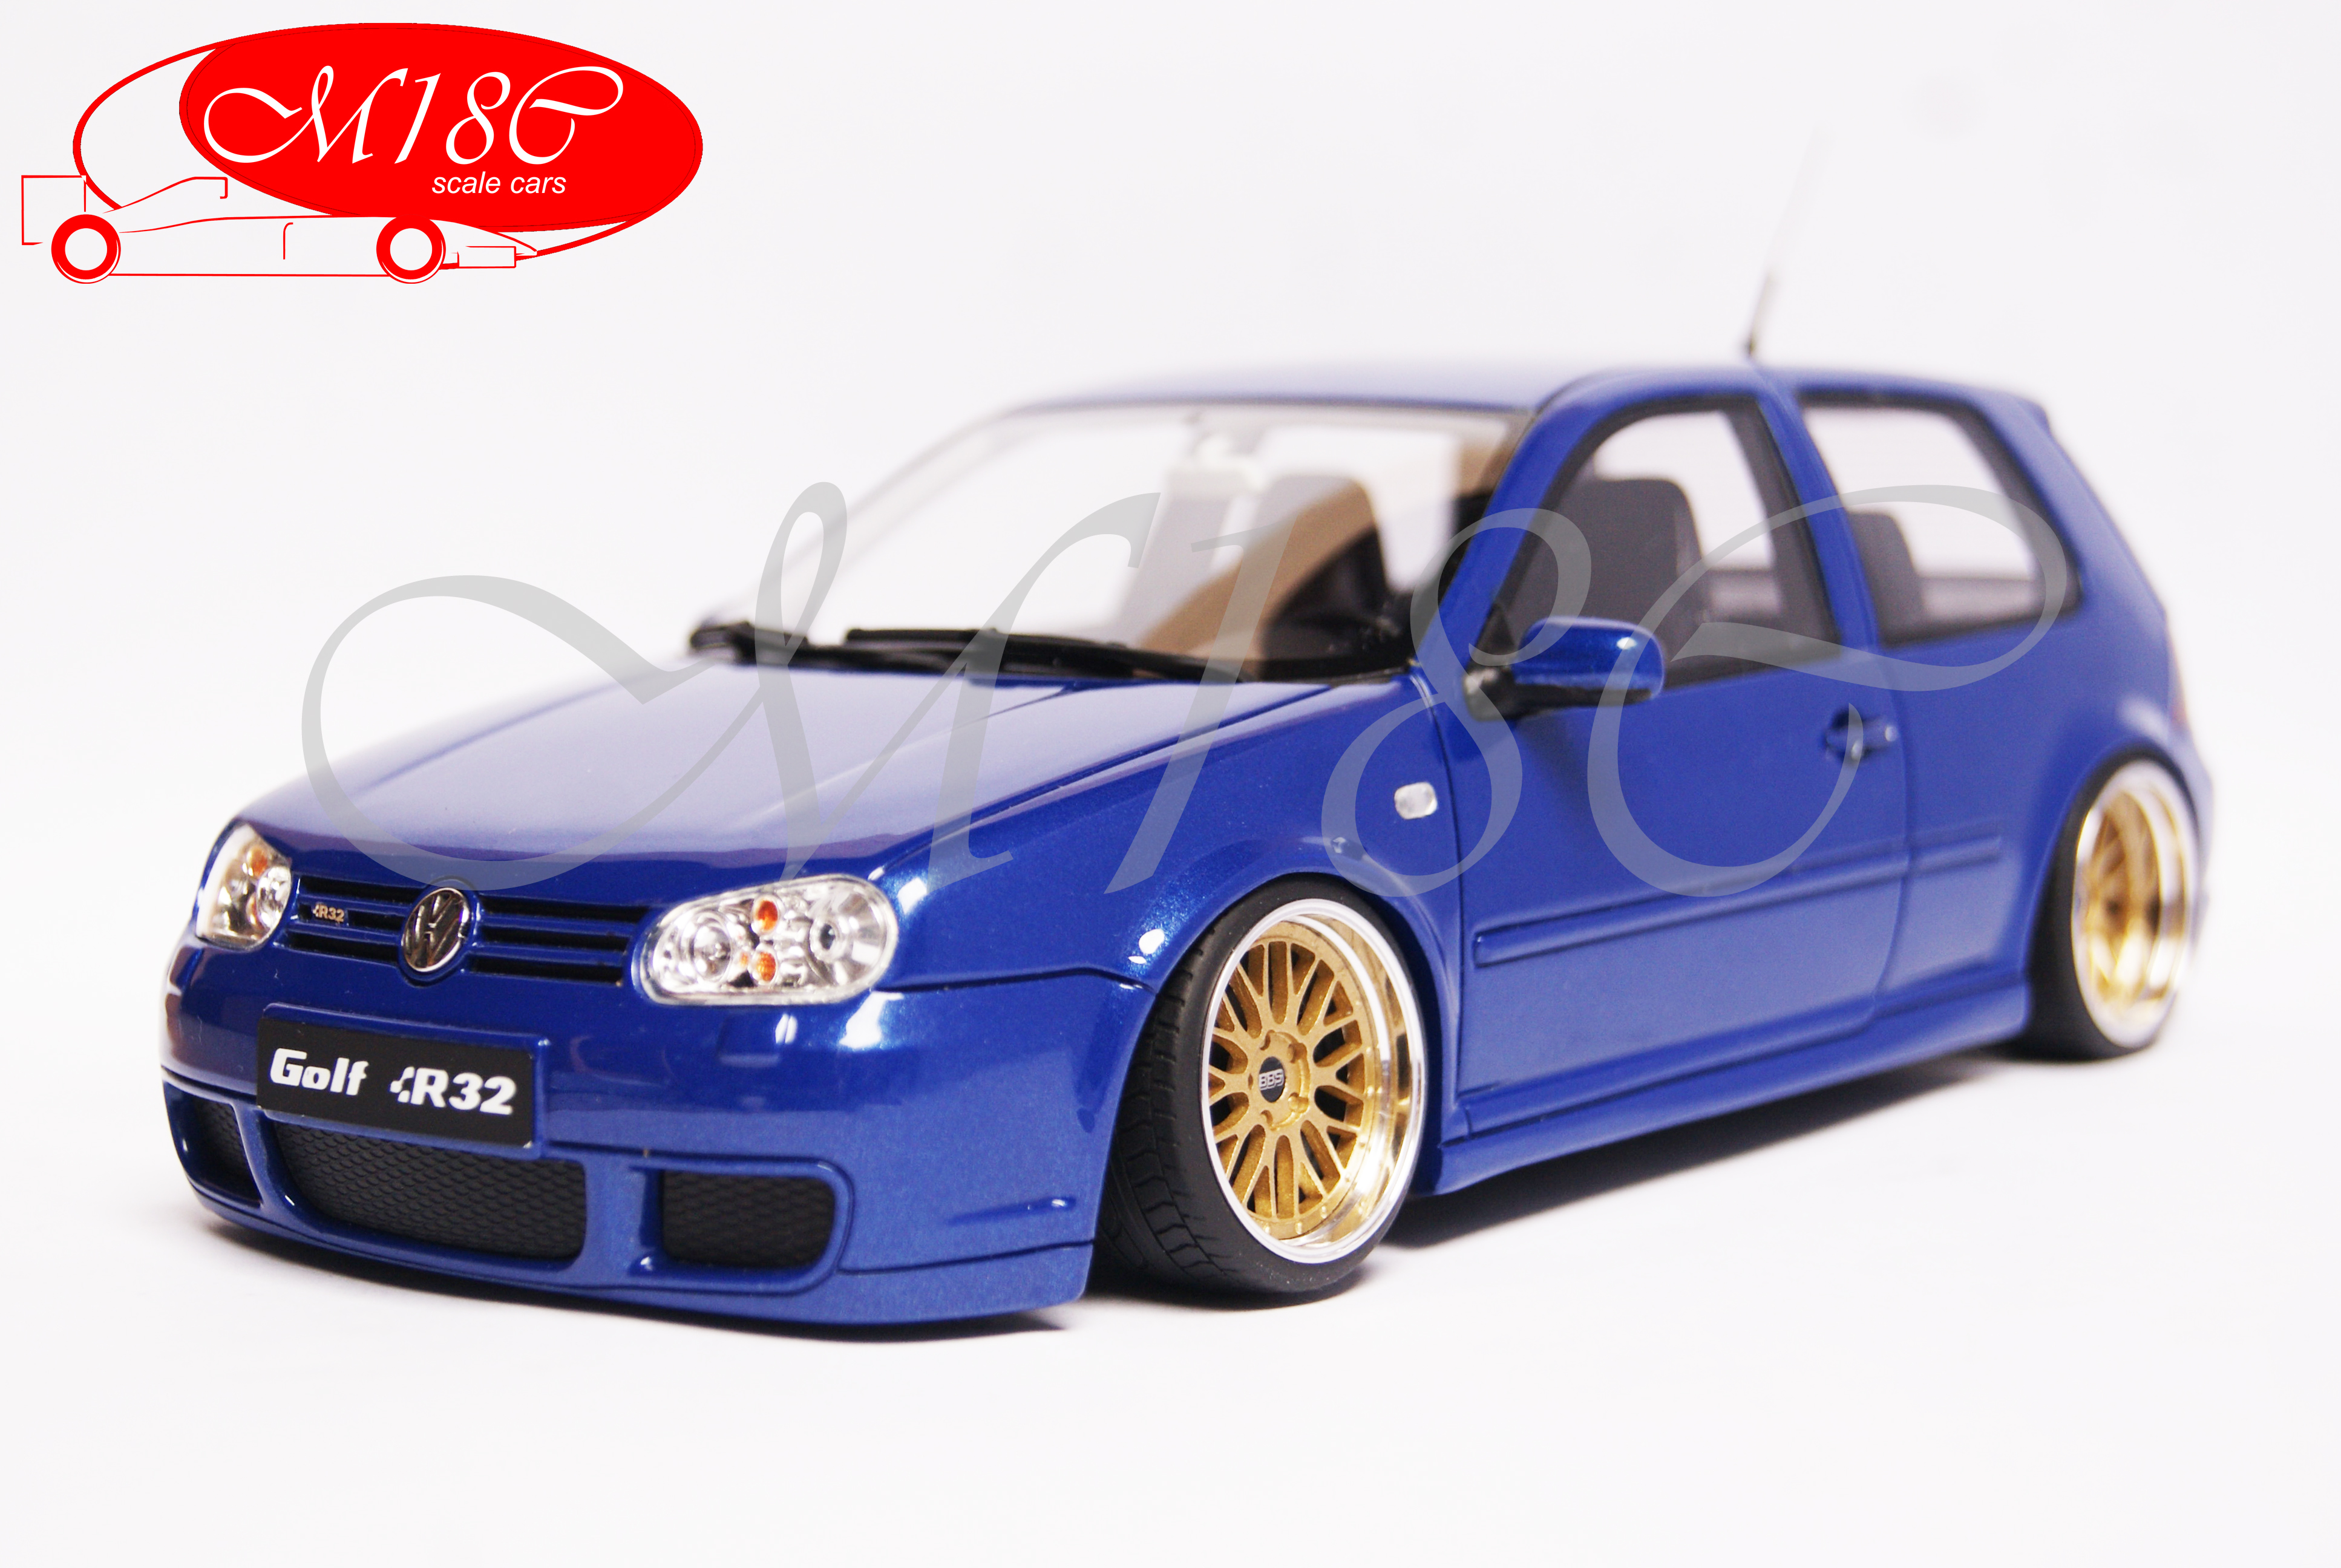 Volkswagen Golf IV R32 1/18 Ottomobile bleu jantes BBS 19 pouces bords larges tuning diecast model cars